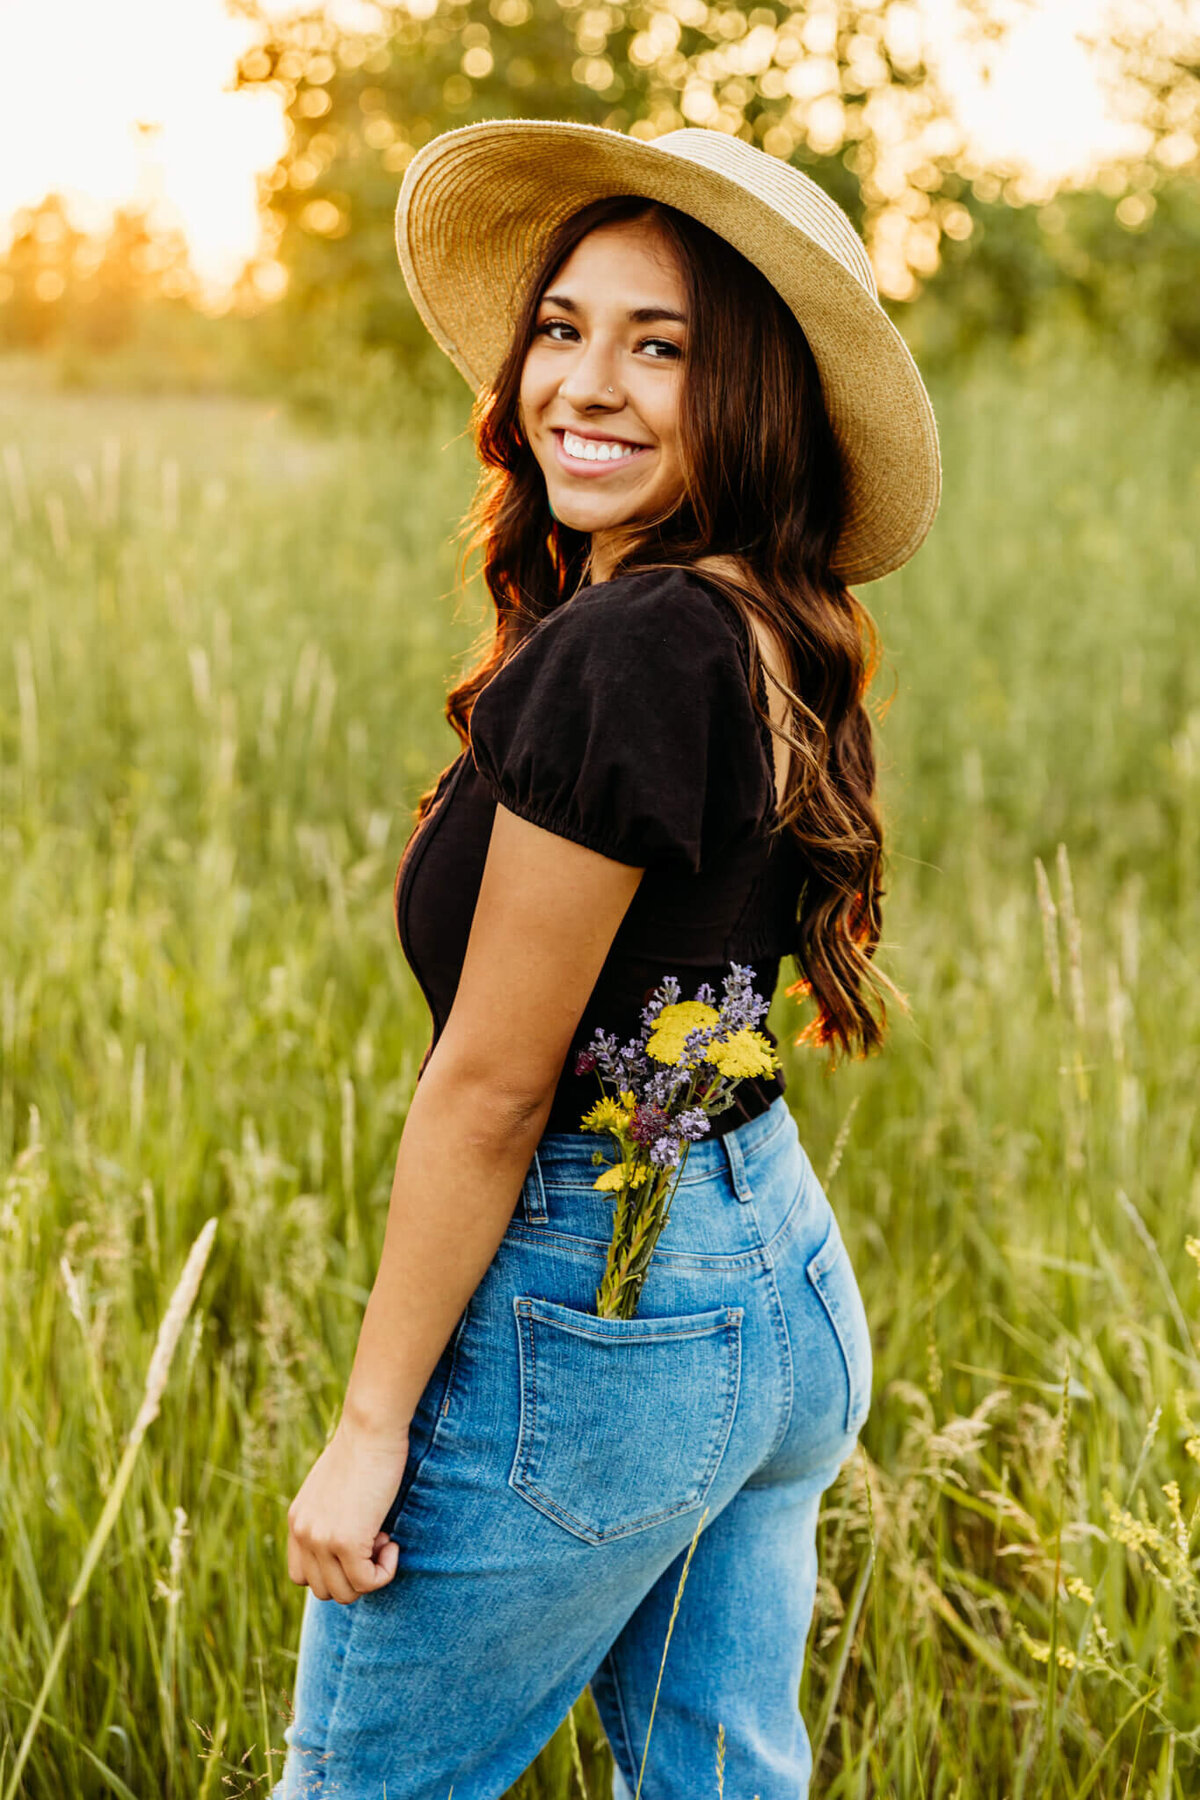 beautiful young lady with flowers in her back pocket and a sunhat looking back